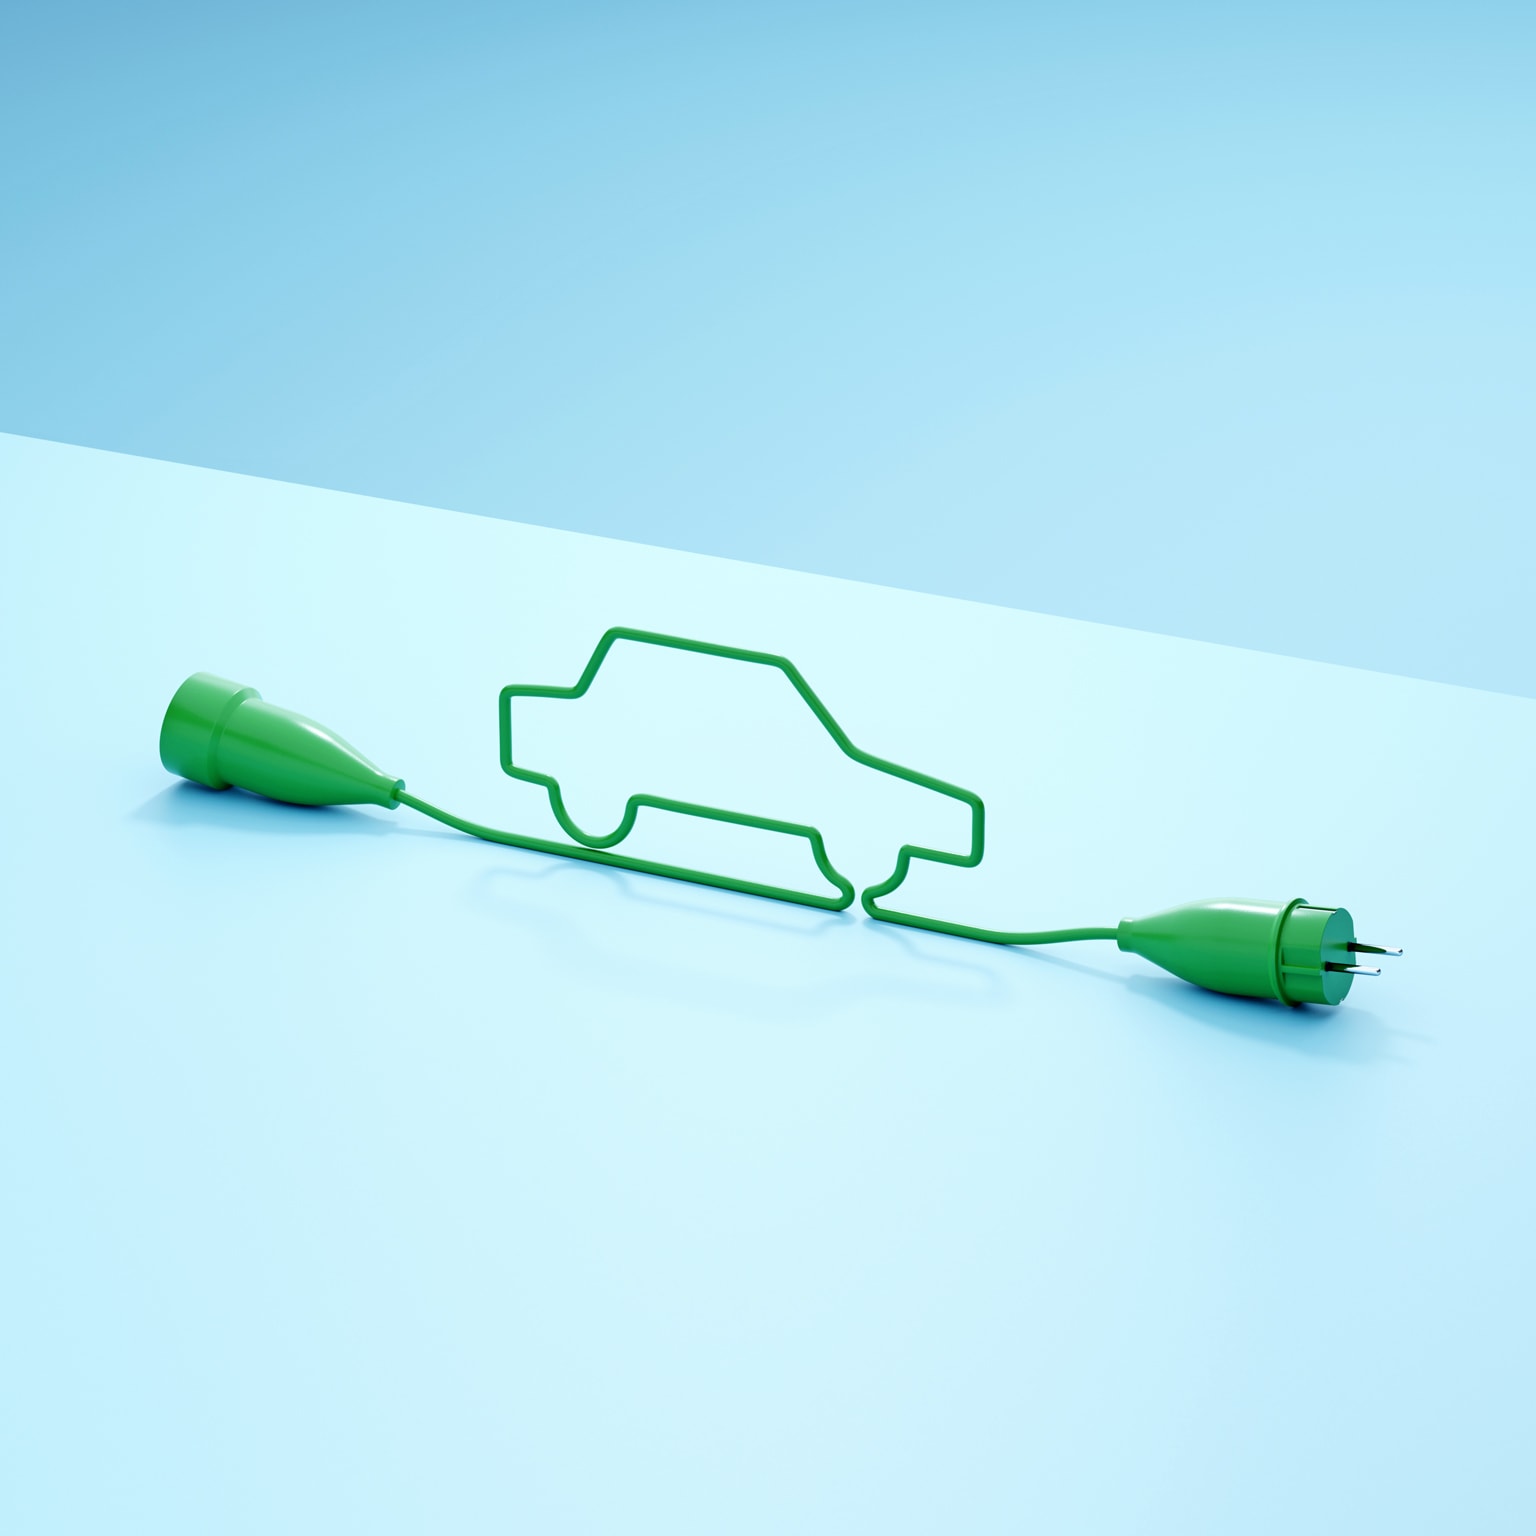 Alternative Fuels Data Center: How Do All-Electric Cars Work?